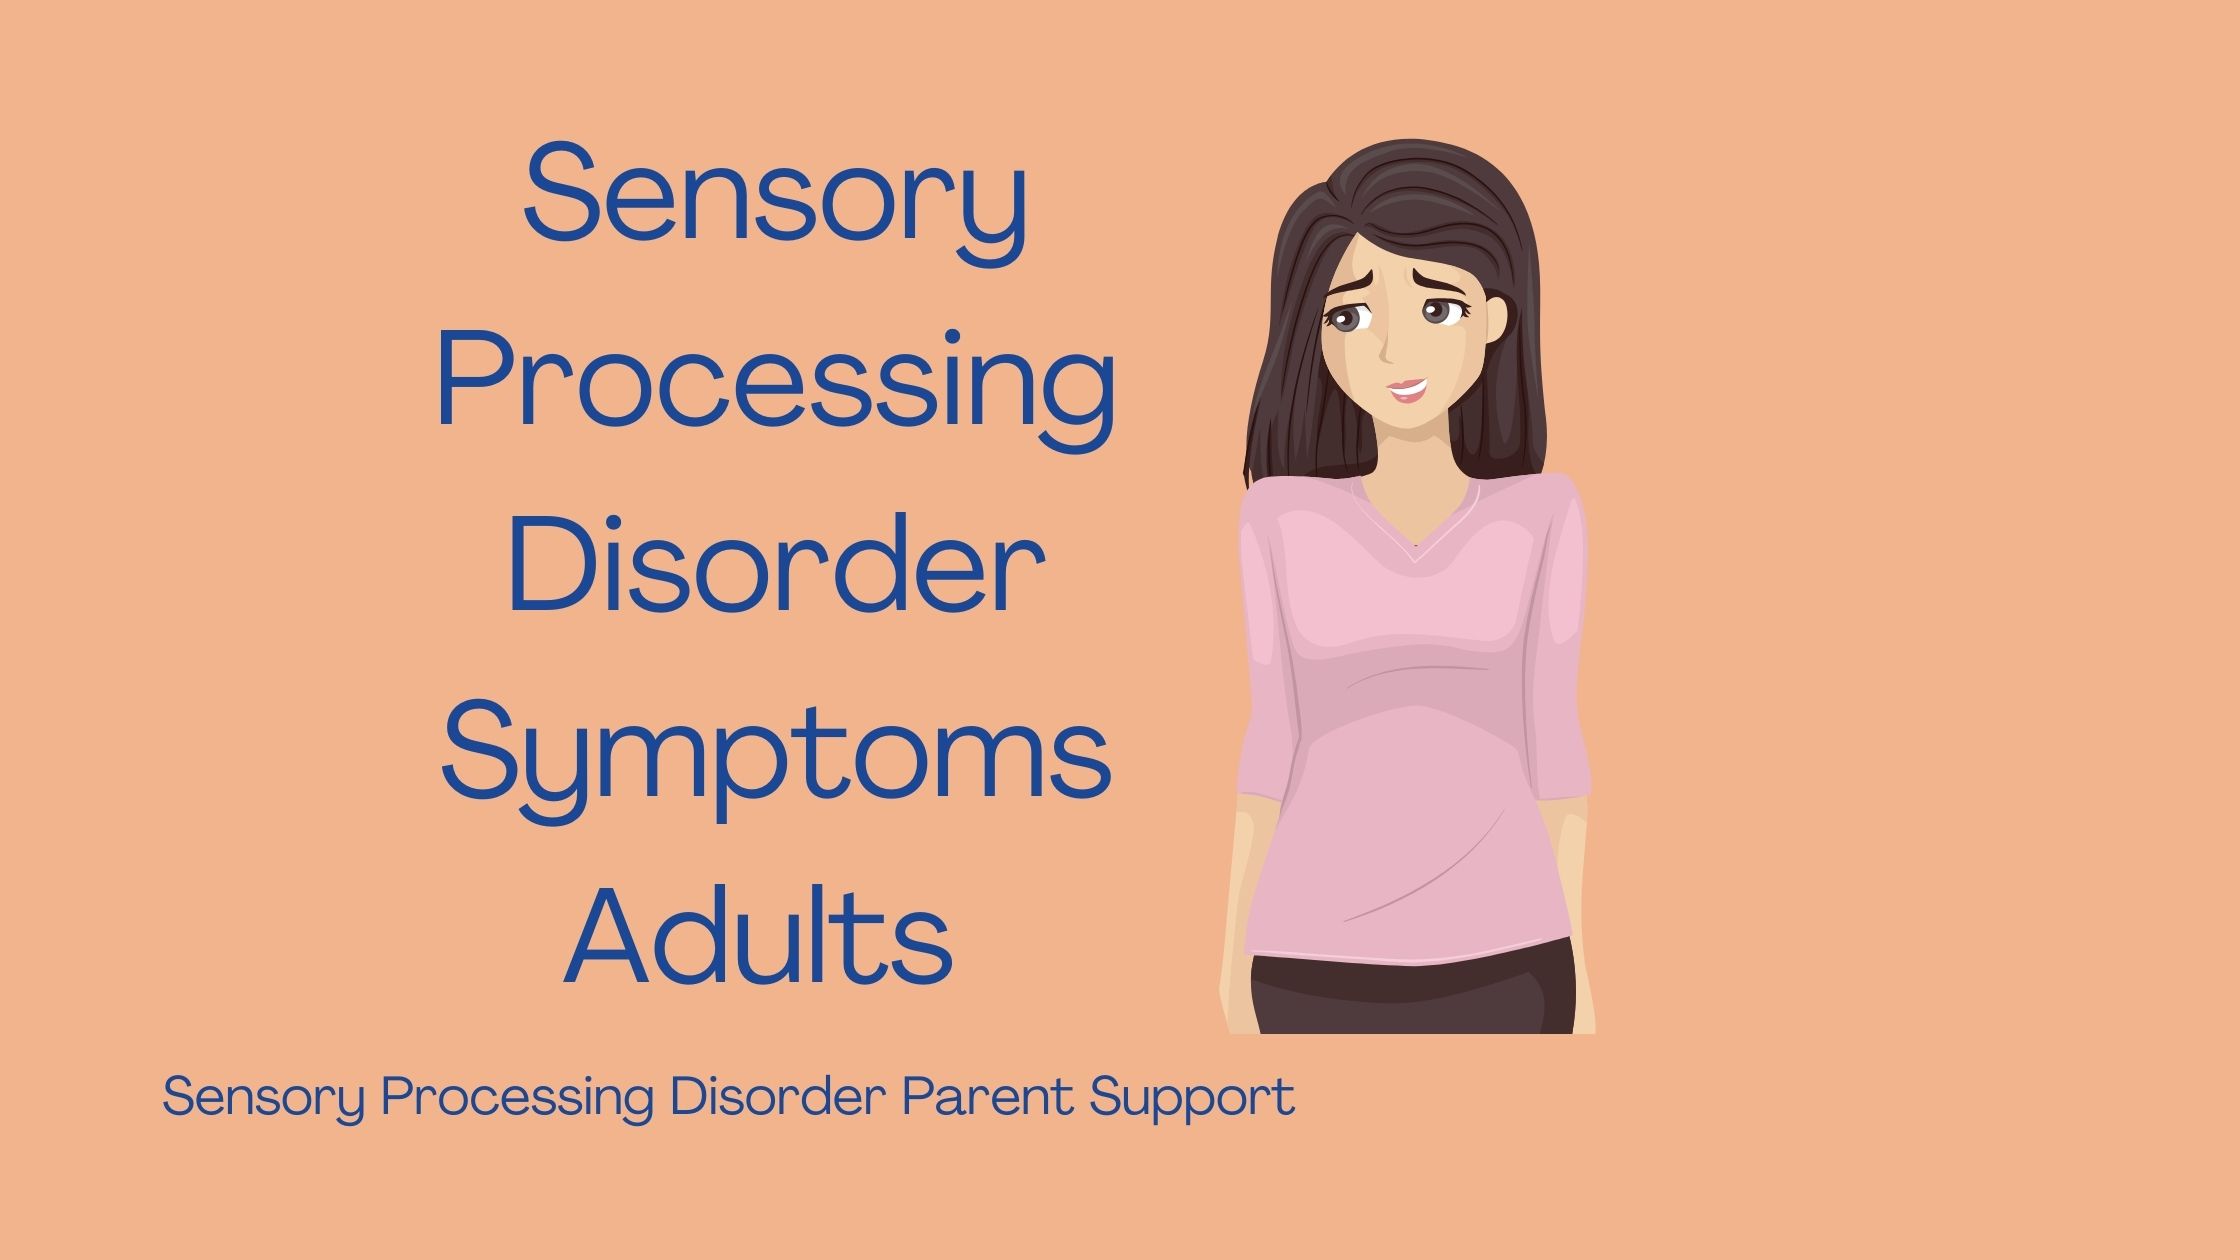 adult who has sensory processing disorder  Sensory Processing Disorder Symptoms Adults